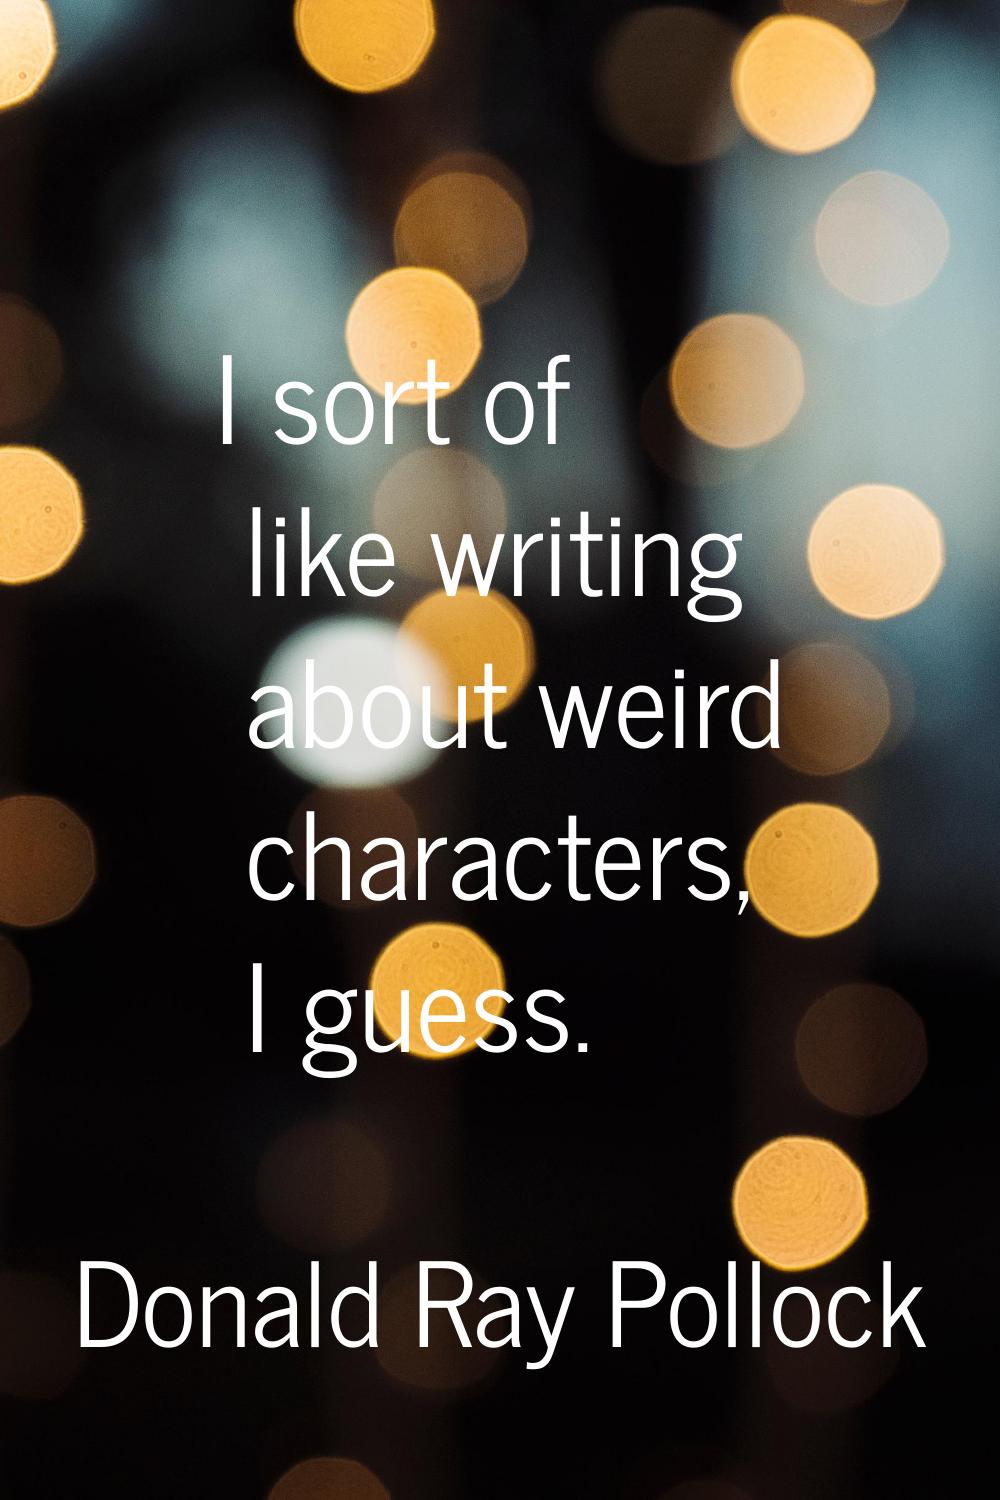 I sort of like writing about weird characters, I guess.